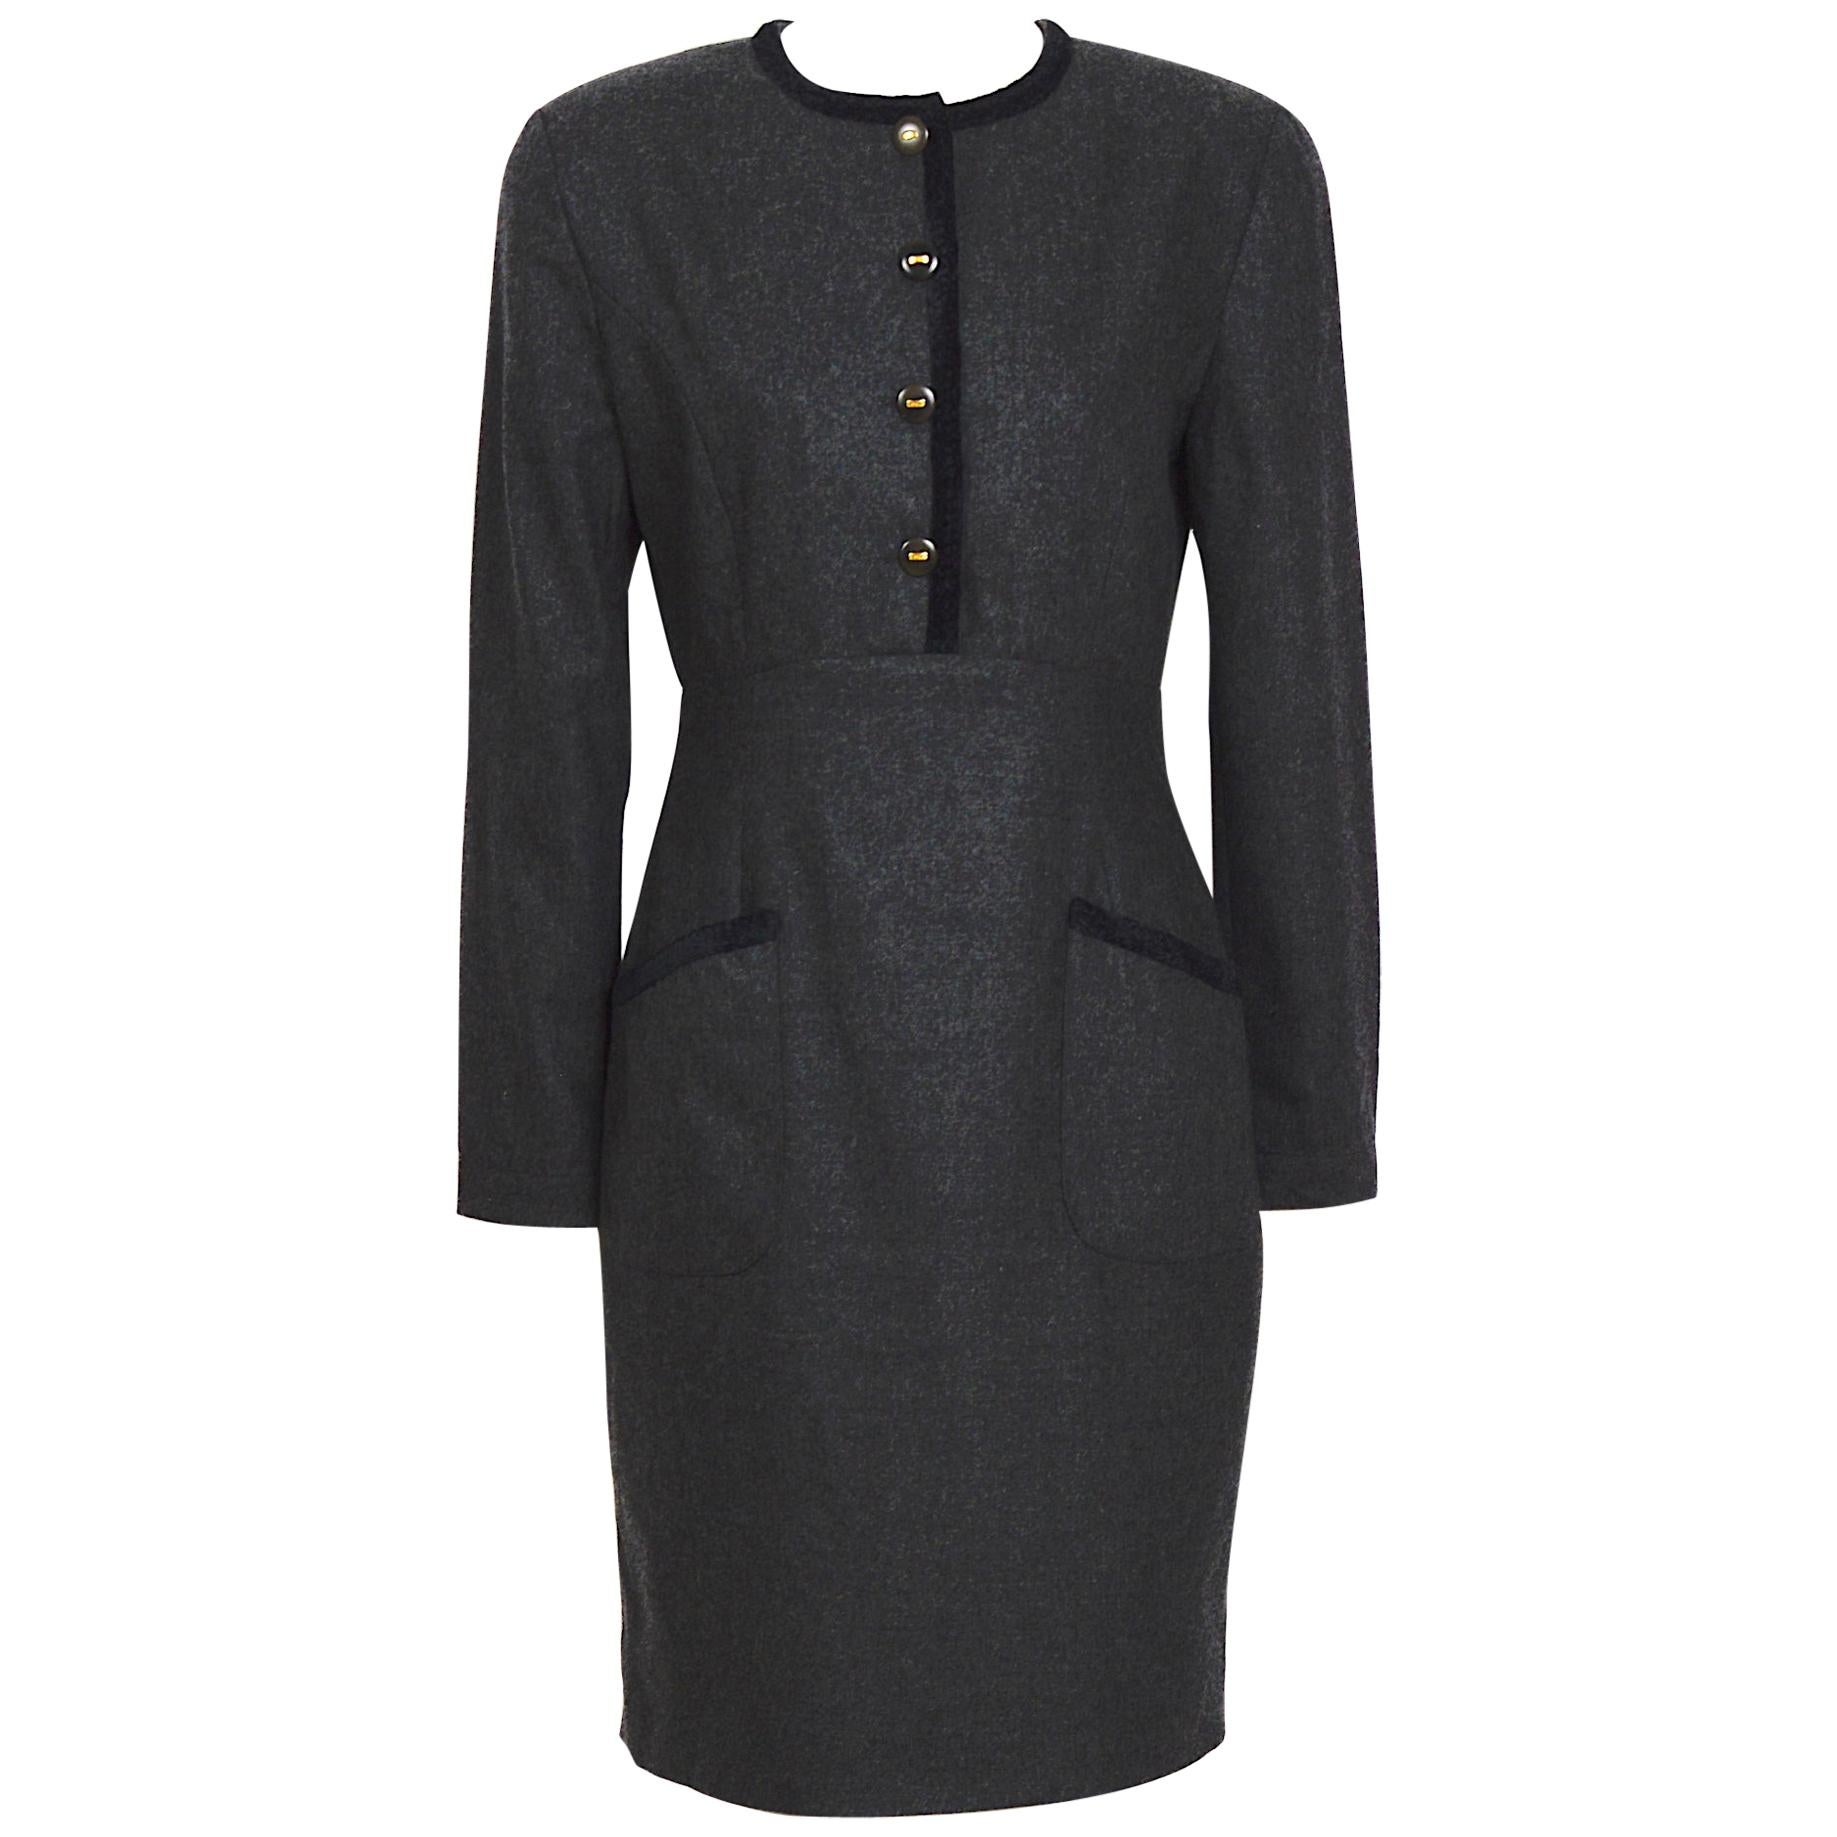 KL by Karl Lagerfeld 1980s grey cashmere & wool mix with KL logo buttons dress For Sale